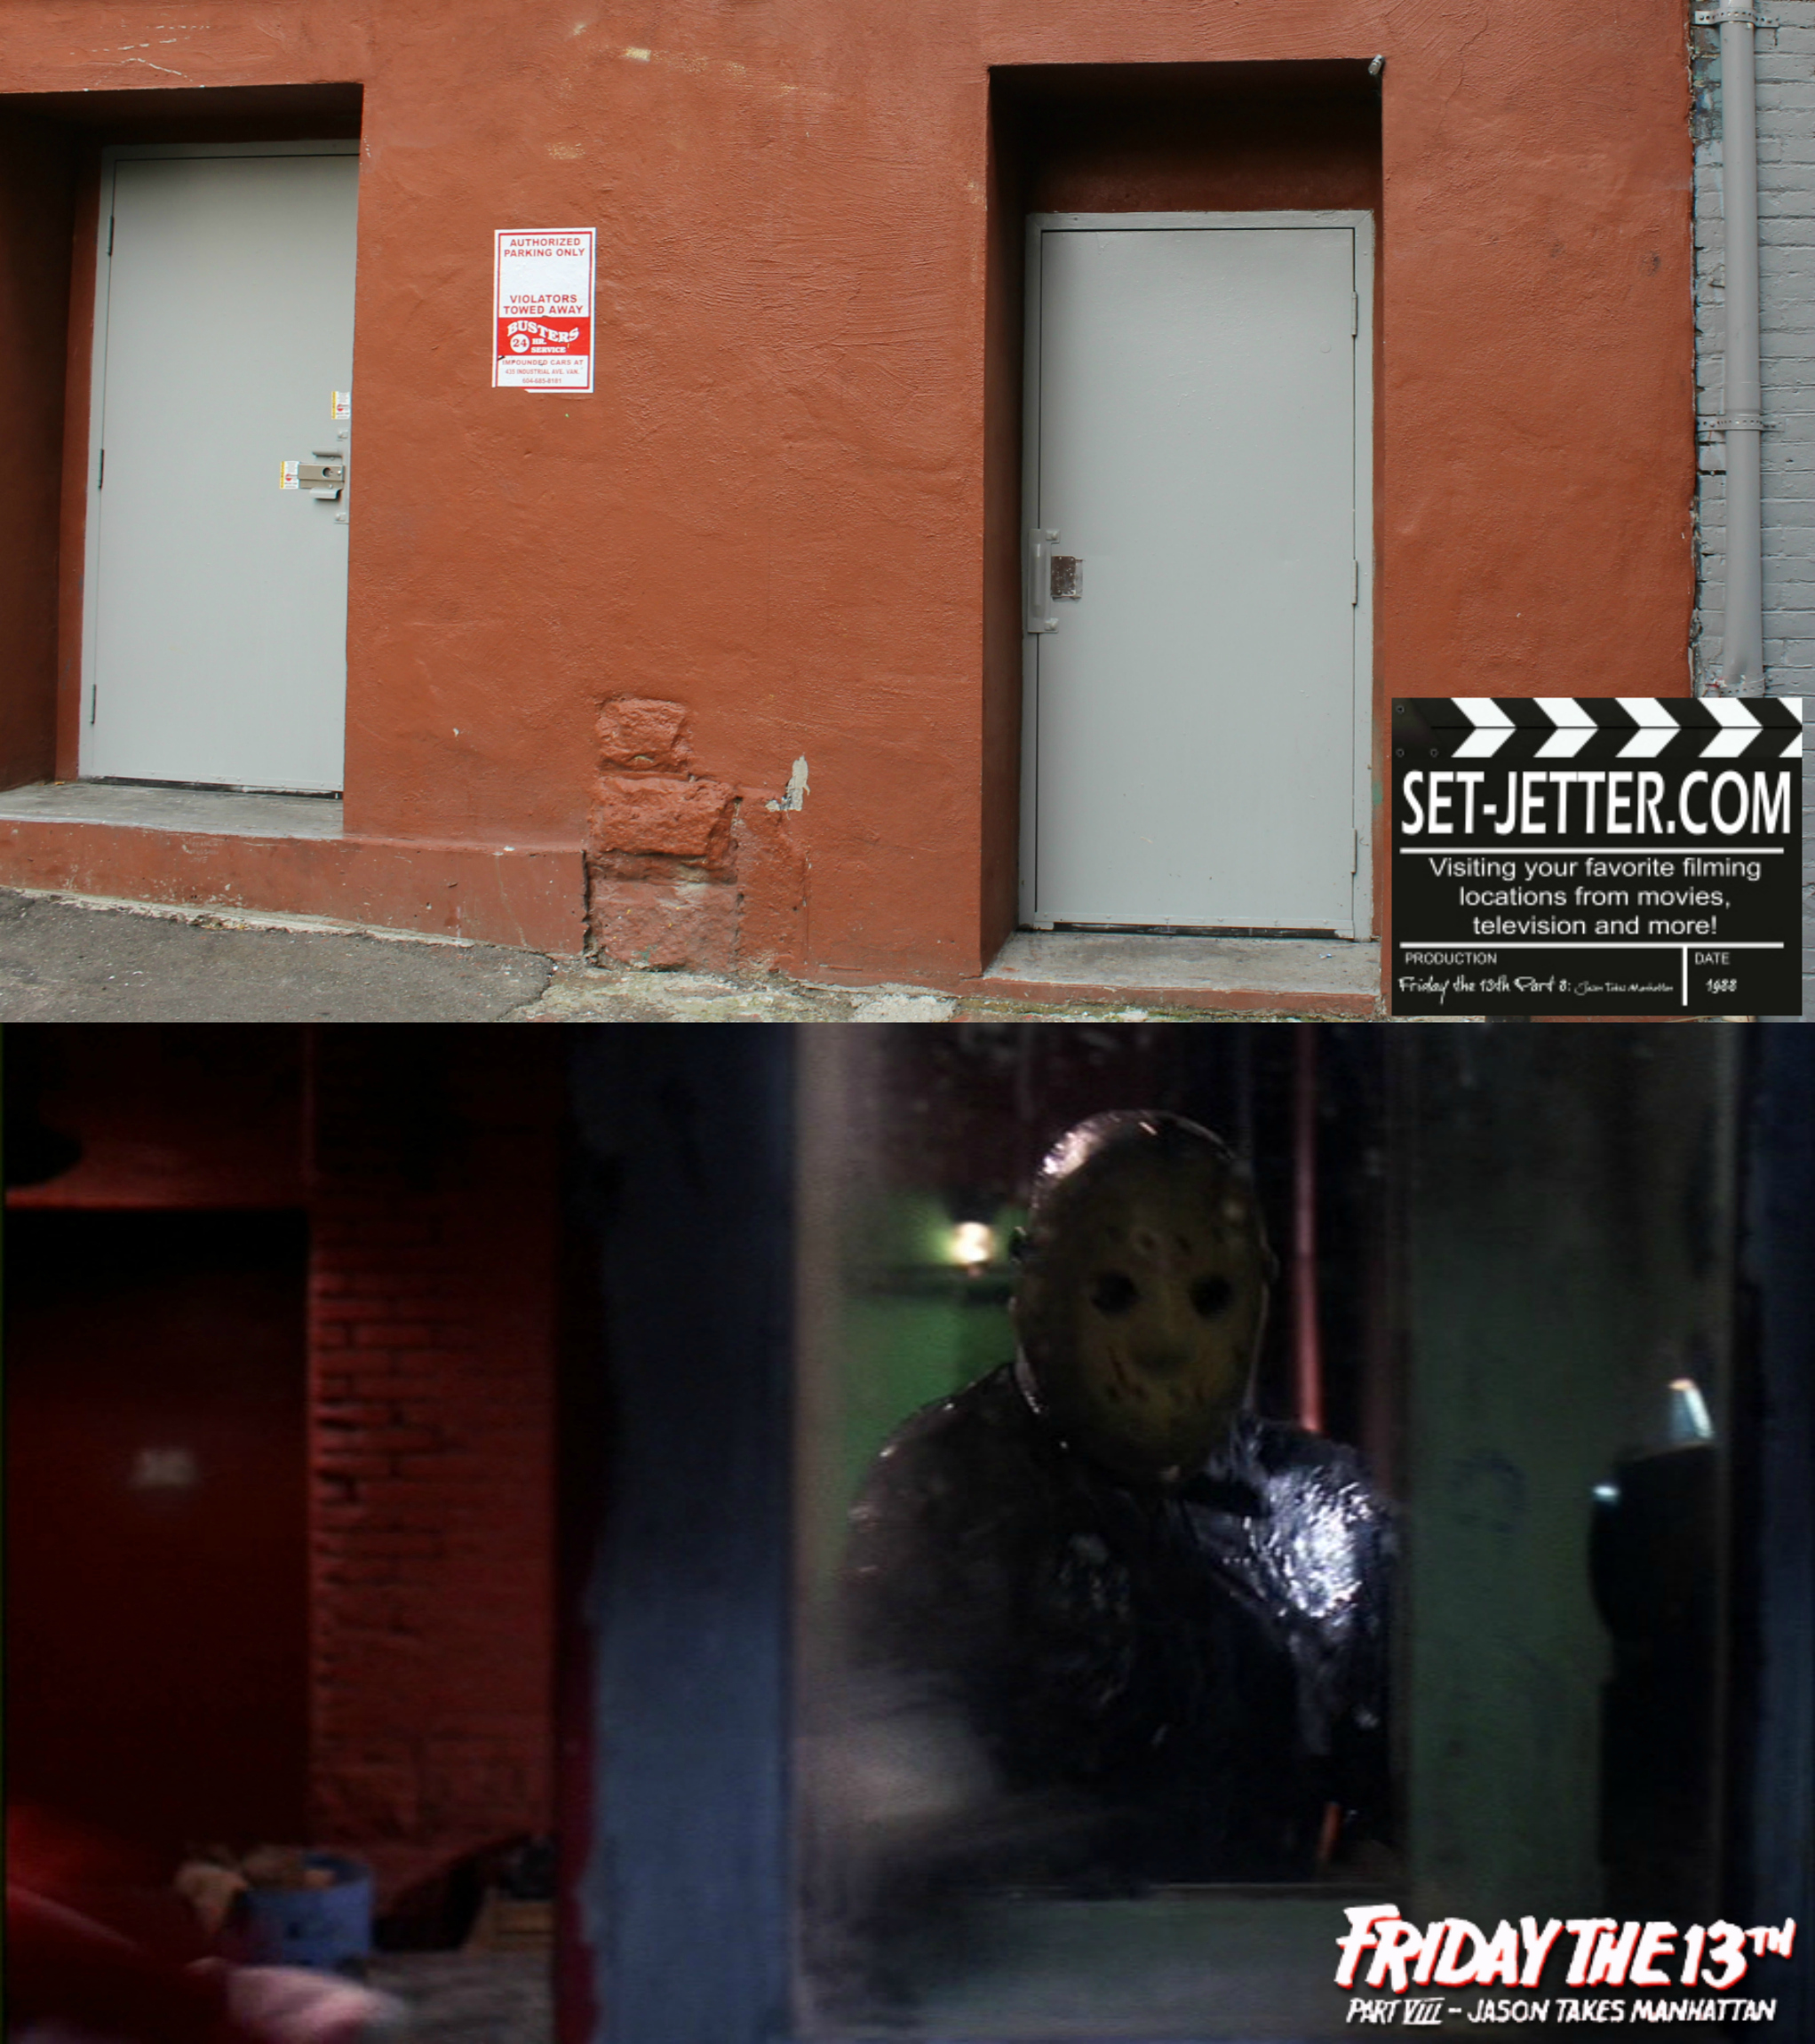 Friday the 13th Part 8 comparison 37.jpg